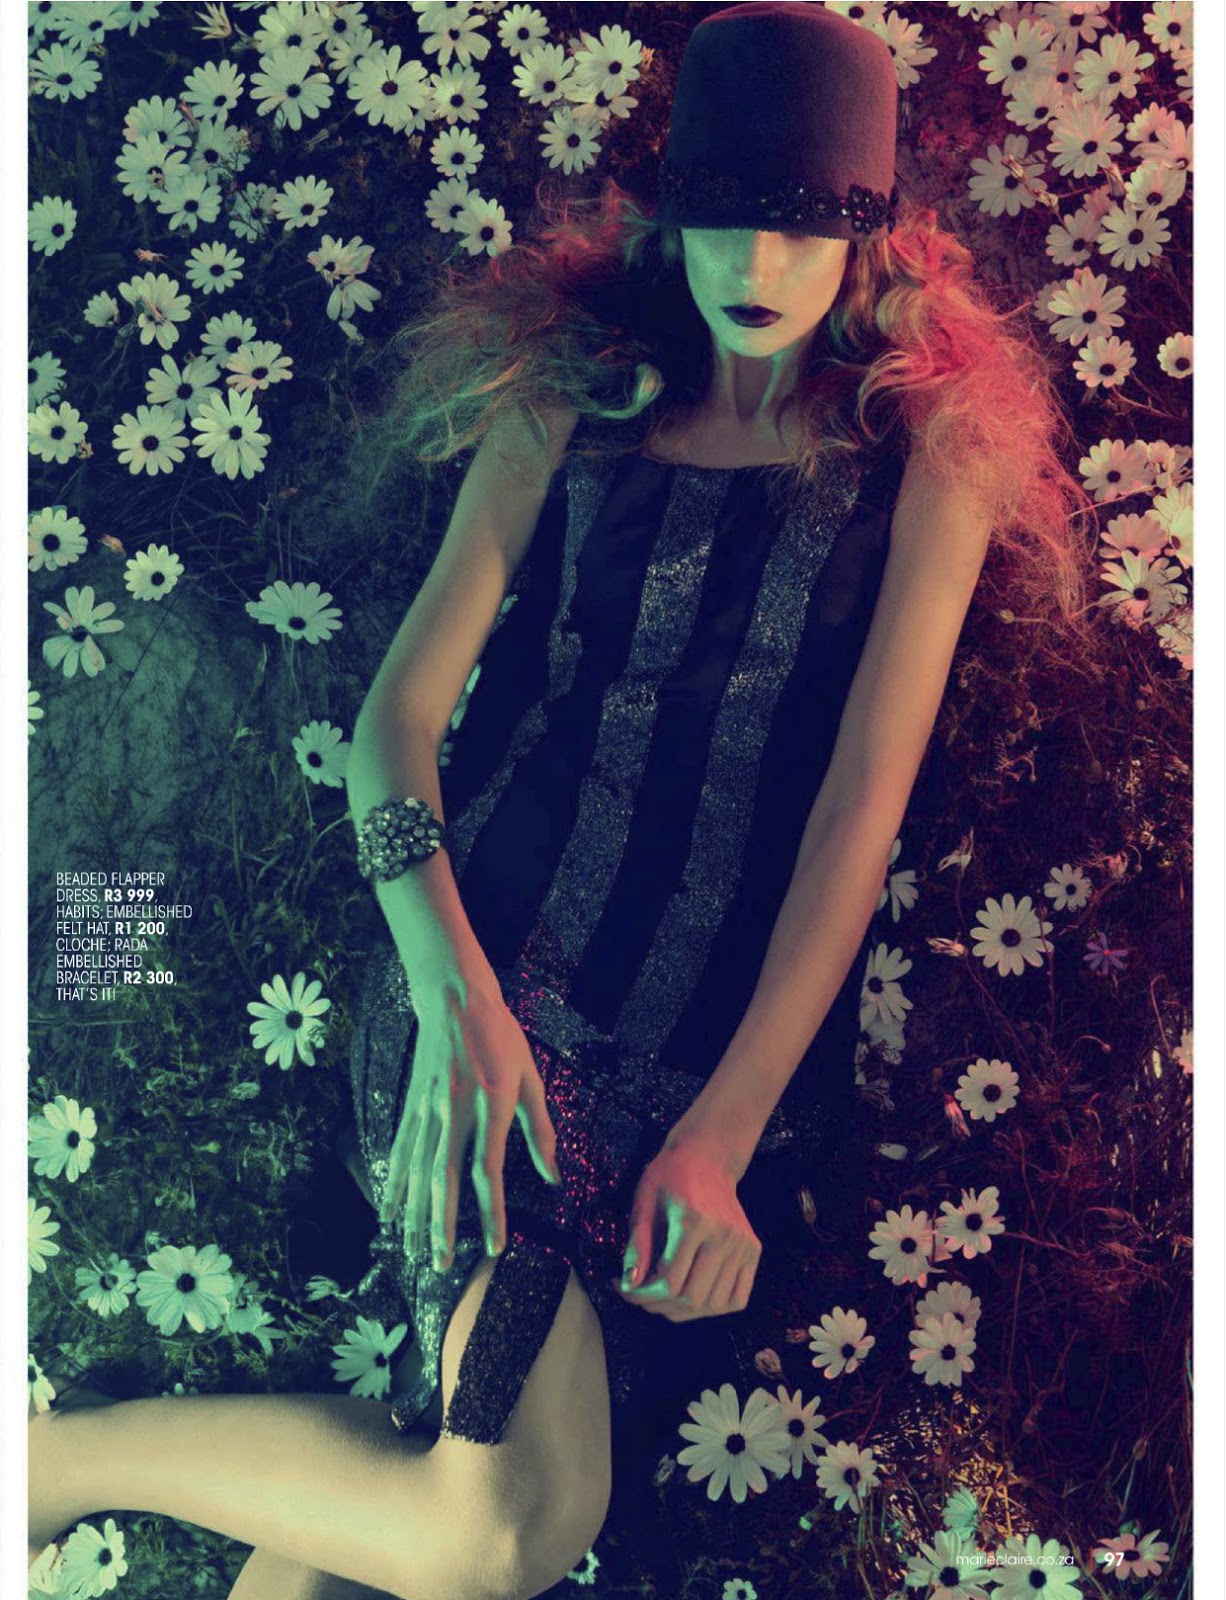 gatsby girl: kayla kuyler by richard keppel-smith for marie claire ...